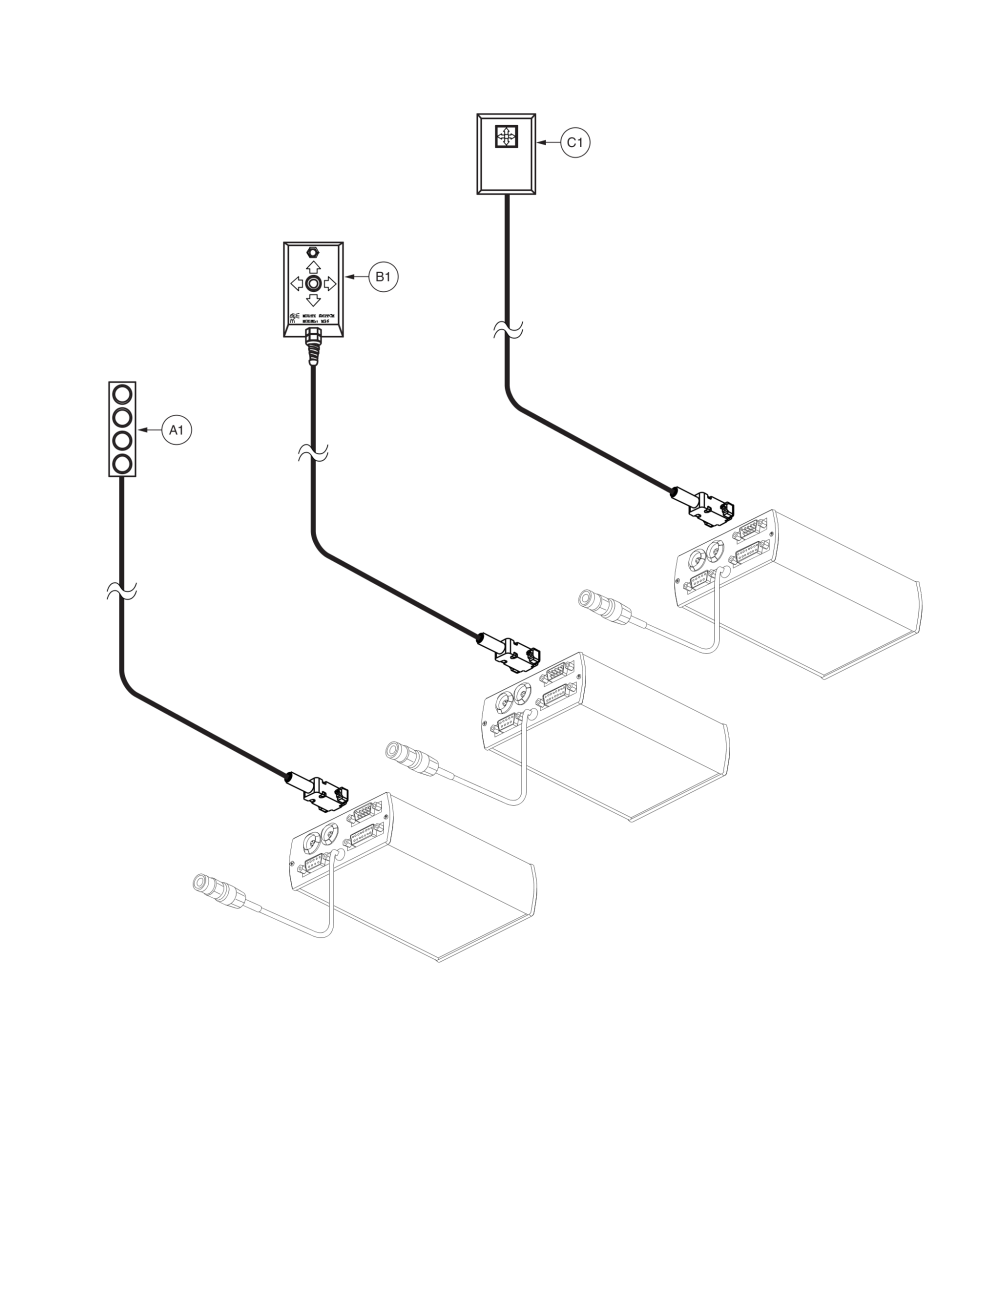 User Controls - 4 Push Button, 4-way Toggle, 4-way Button Toggle parts diagram